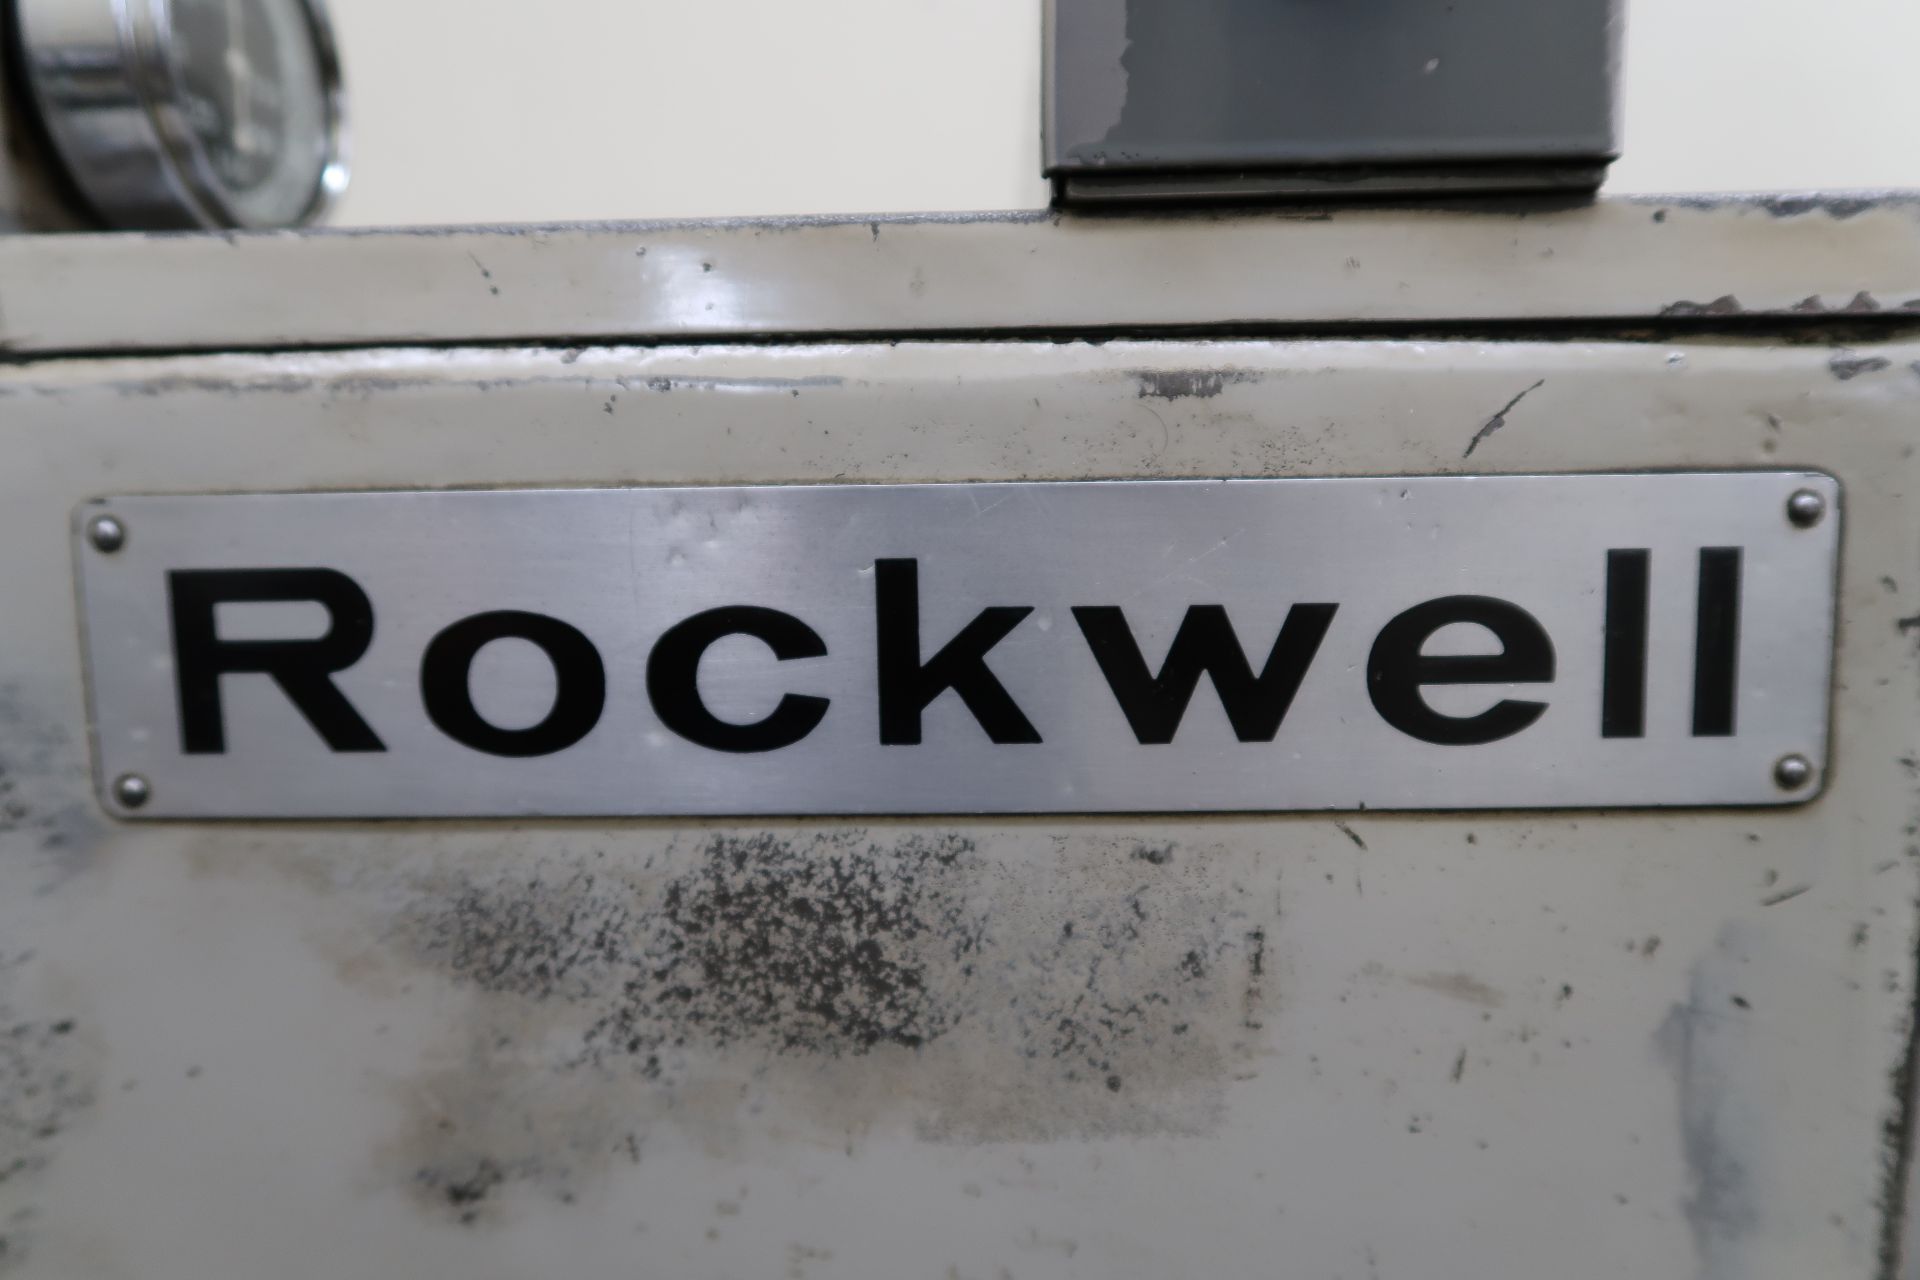 Rockwell “Delta 14” 14” x 45” Lathe s/n 1403561 w 40-1600 Adjustable RPM, (SOLD AS IS) - Image 9 of 9